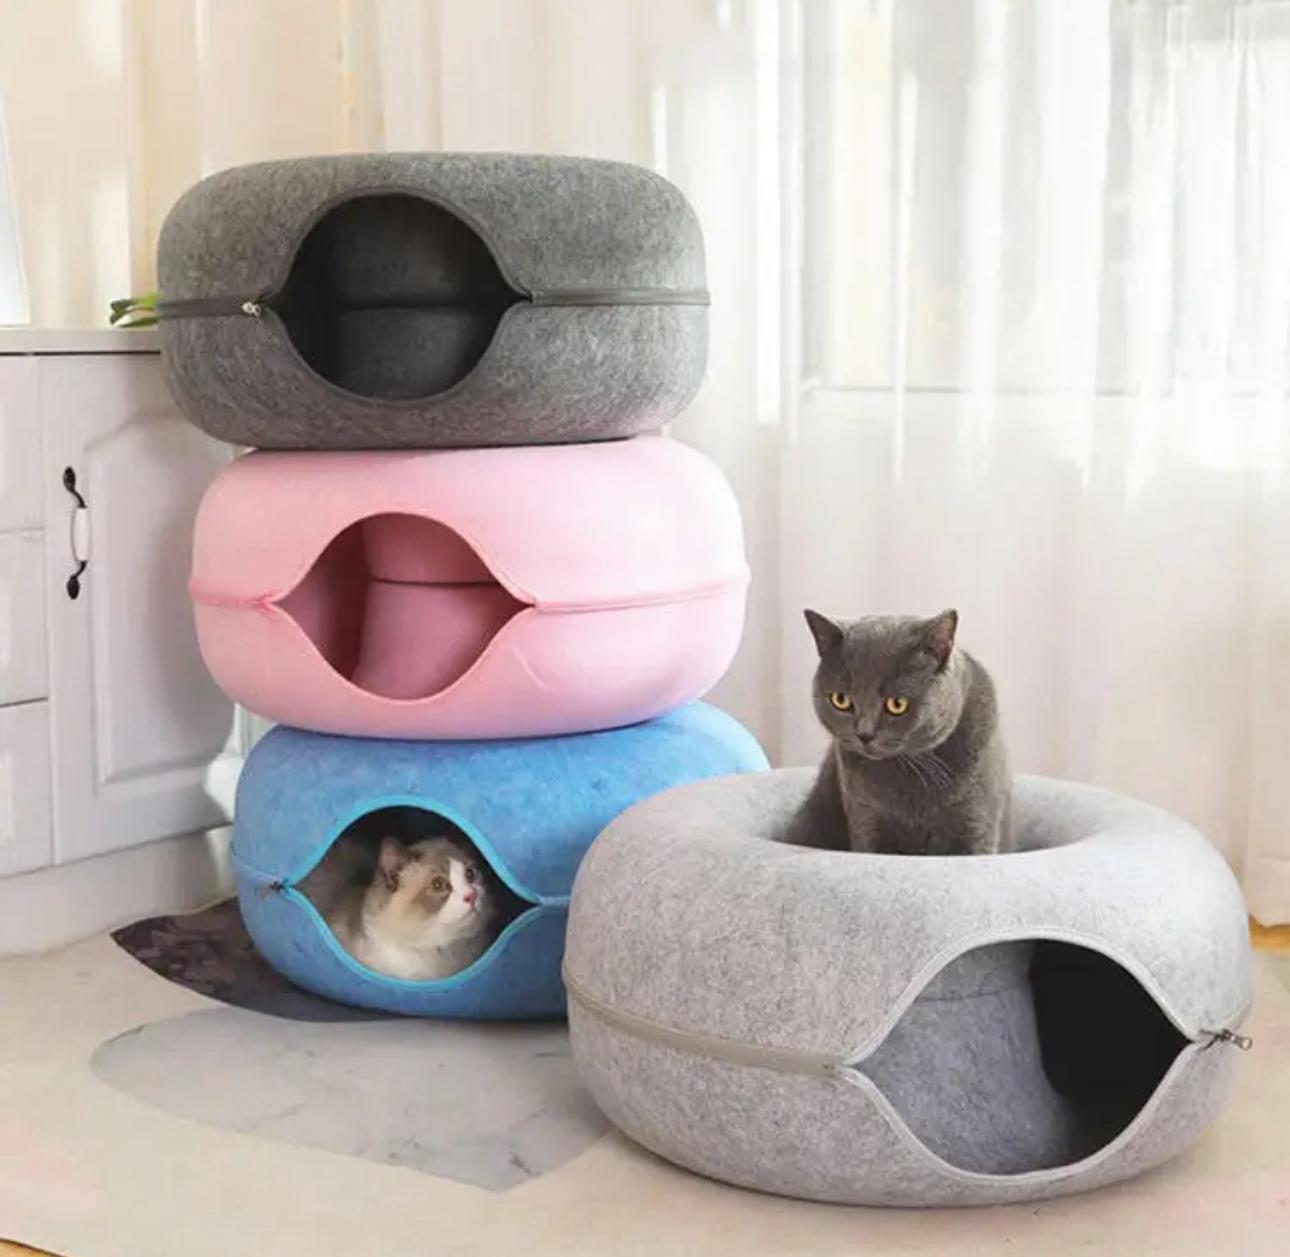 Donut house and toy 🍩 for cats